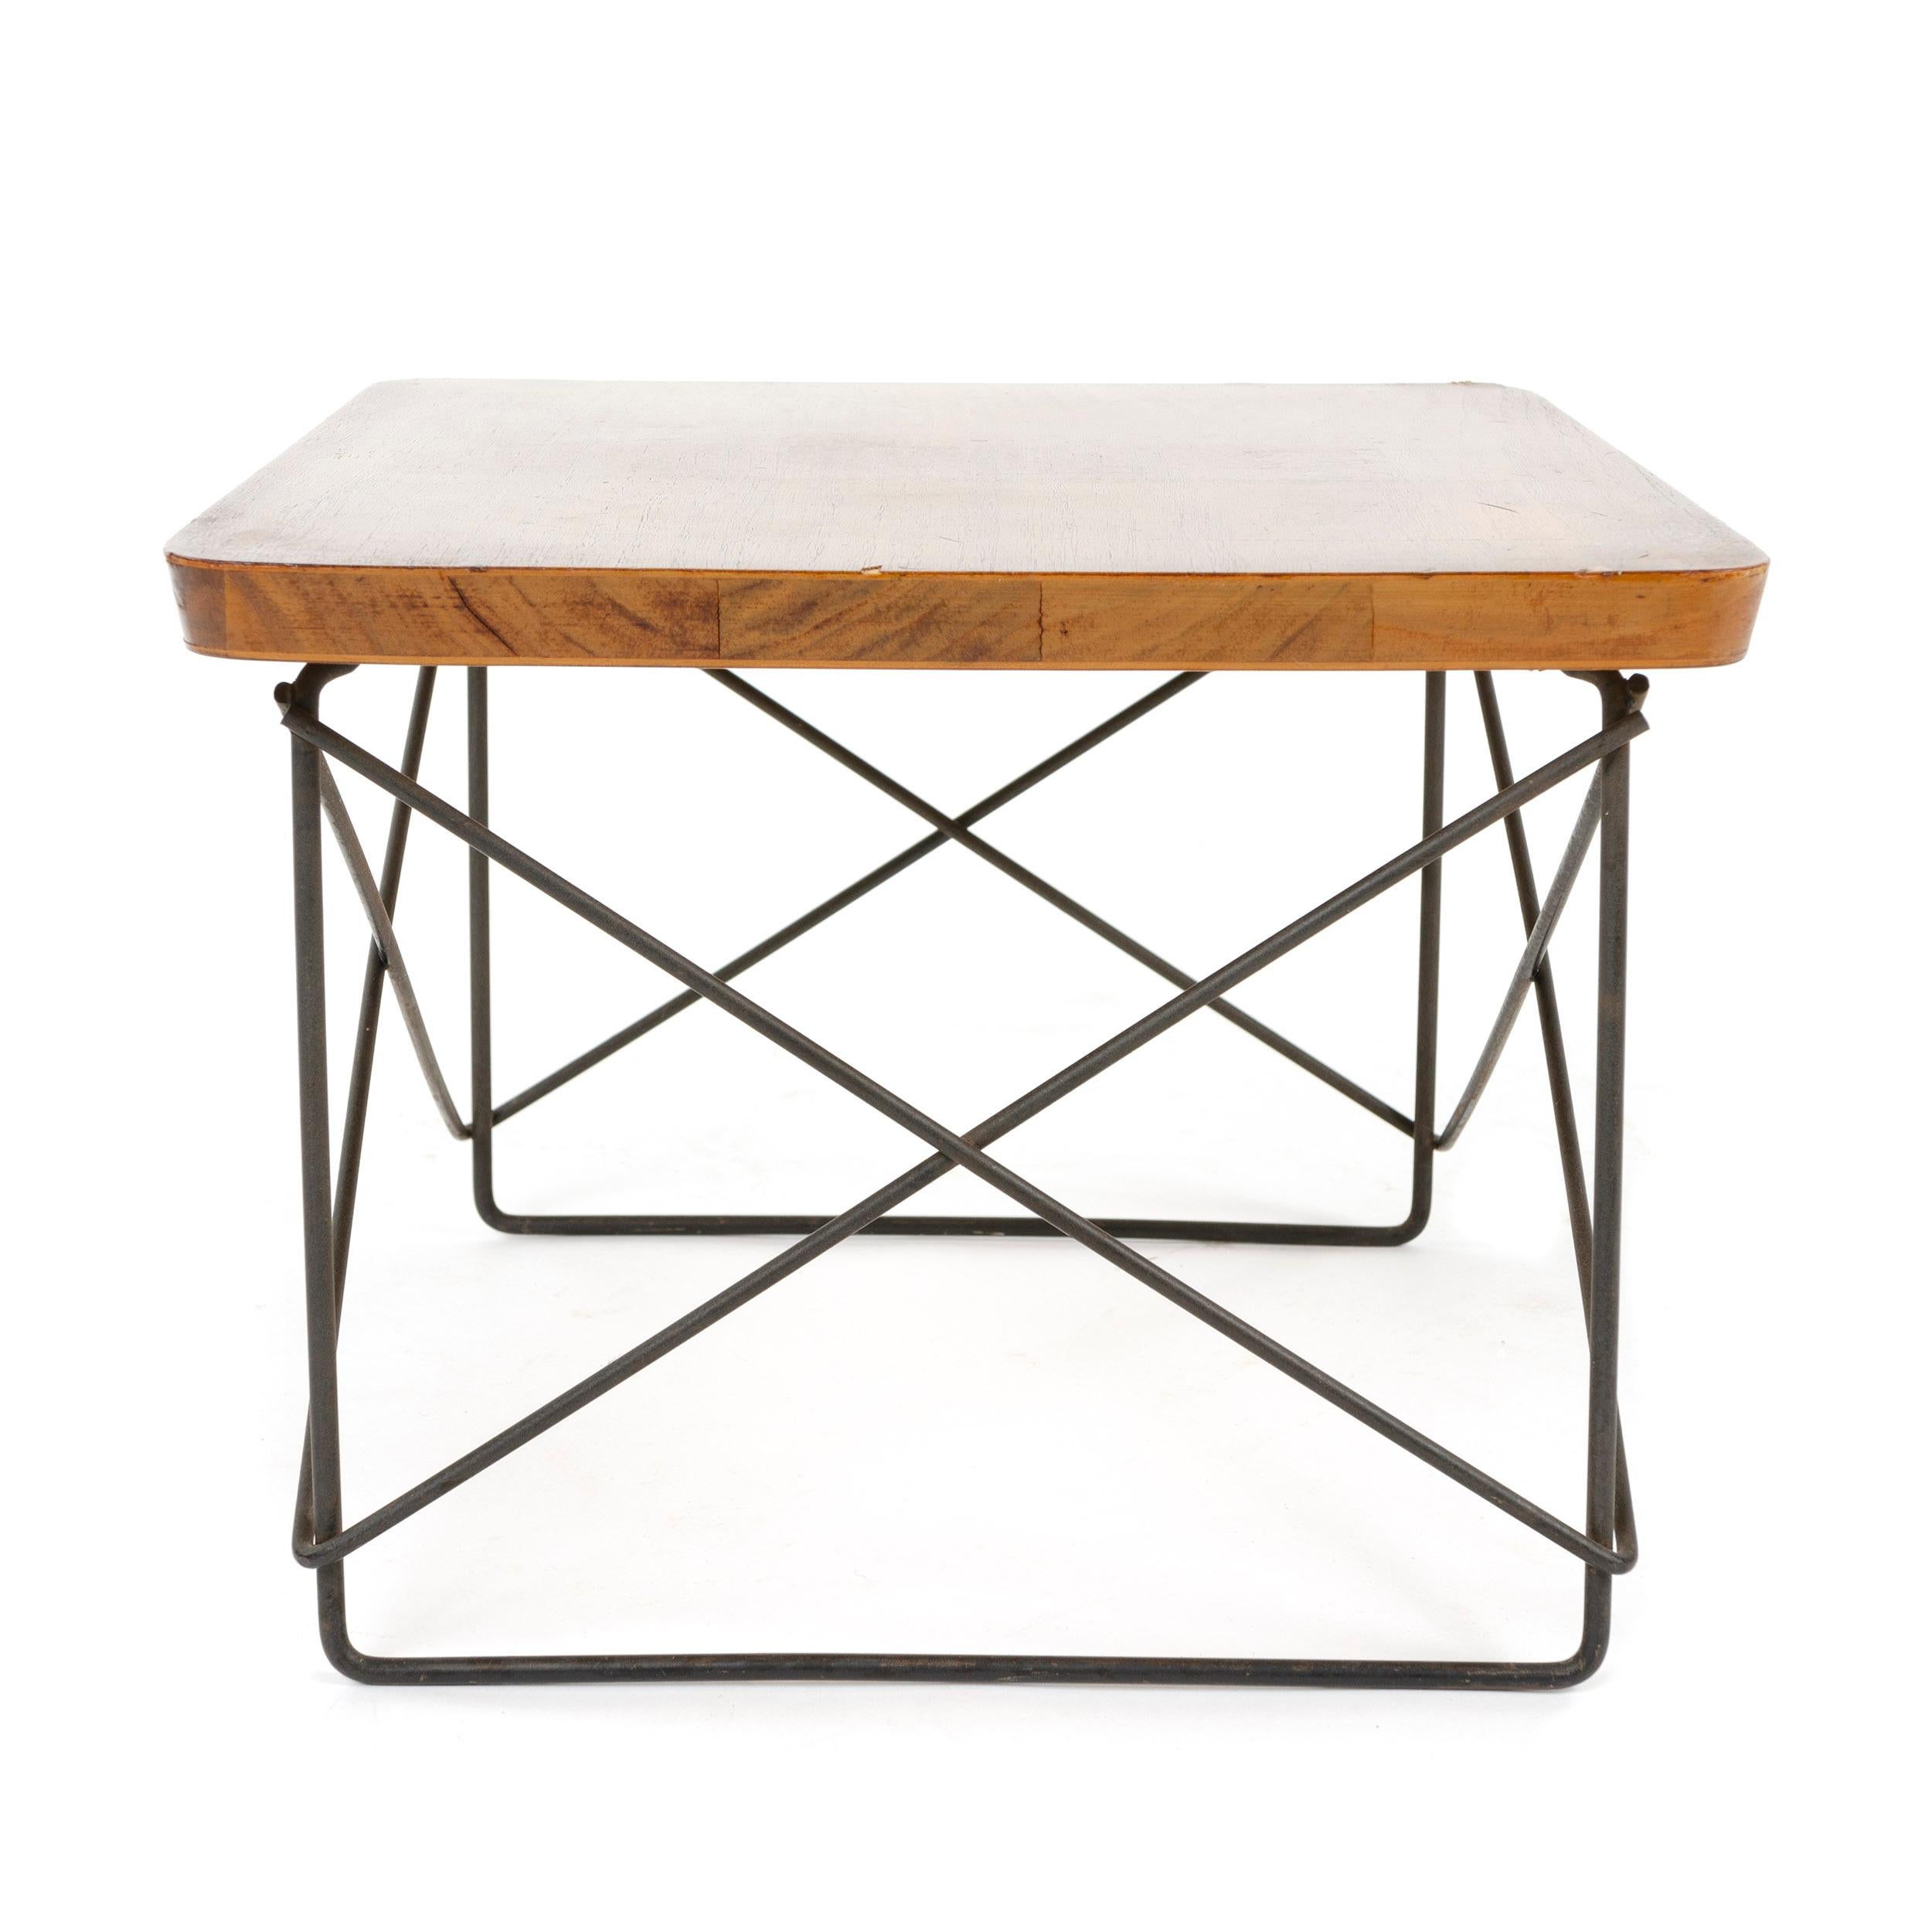 American 1950s 'LTR' Table by Charles and Ray Eames for Herman Miller